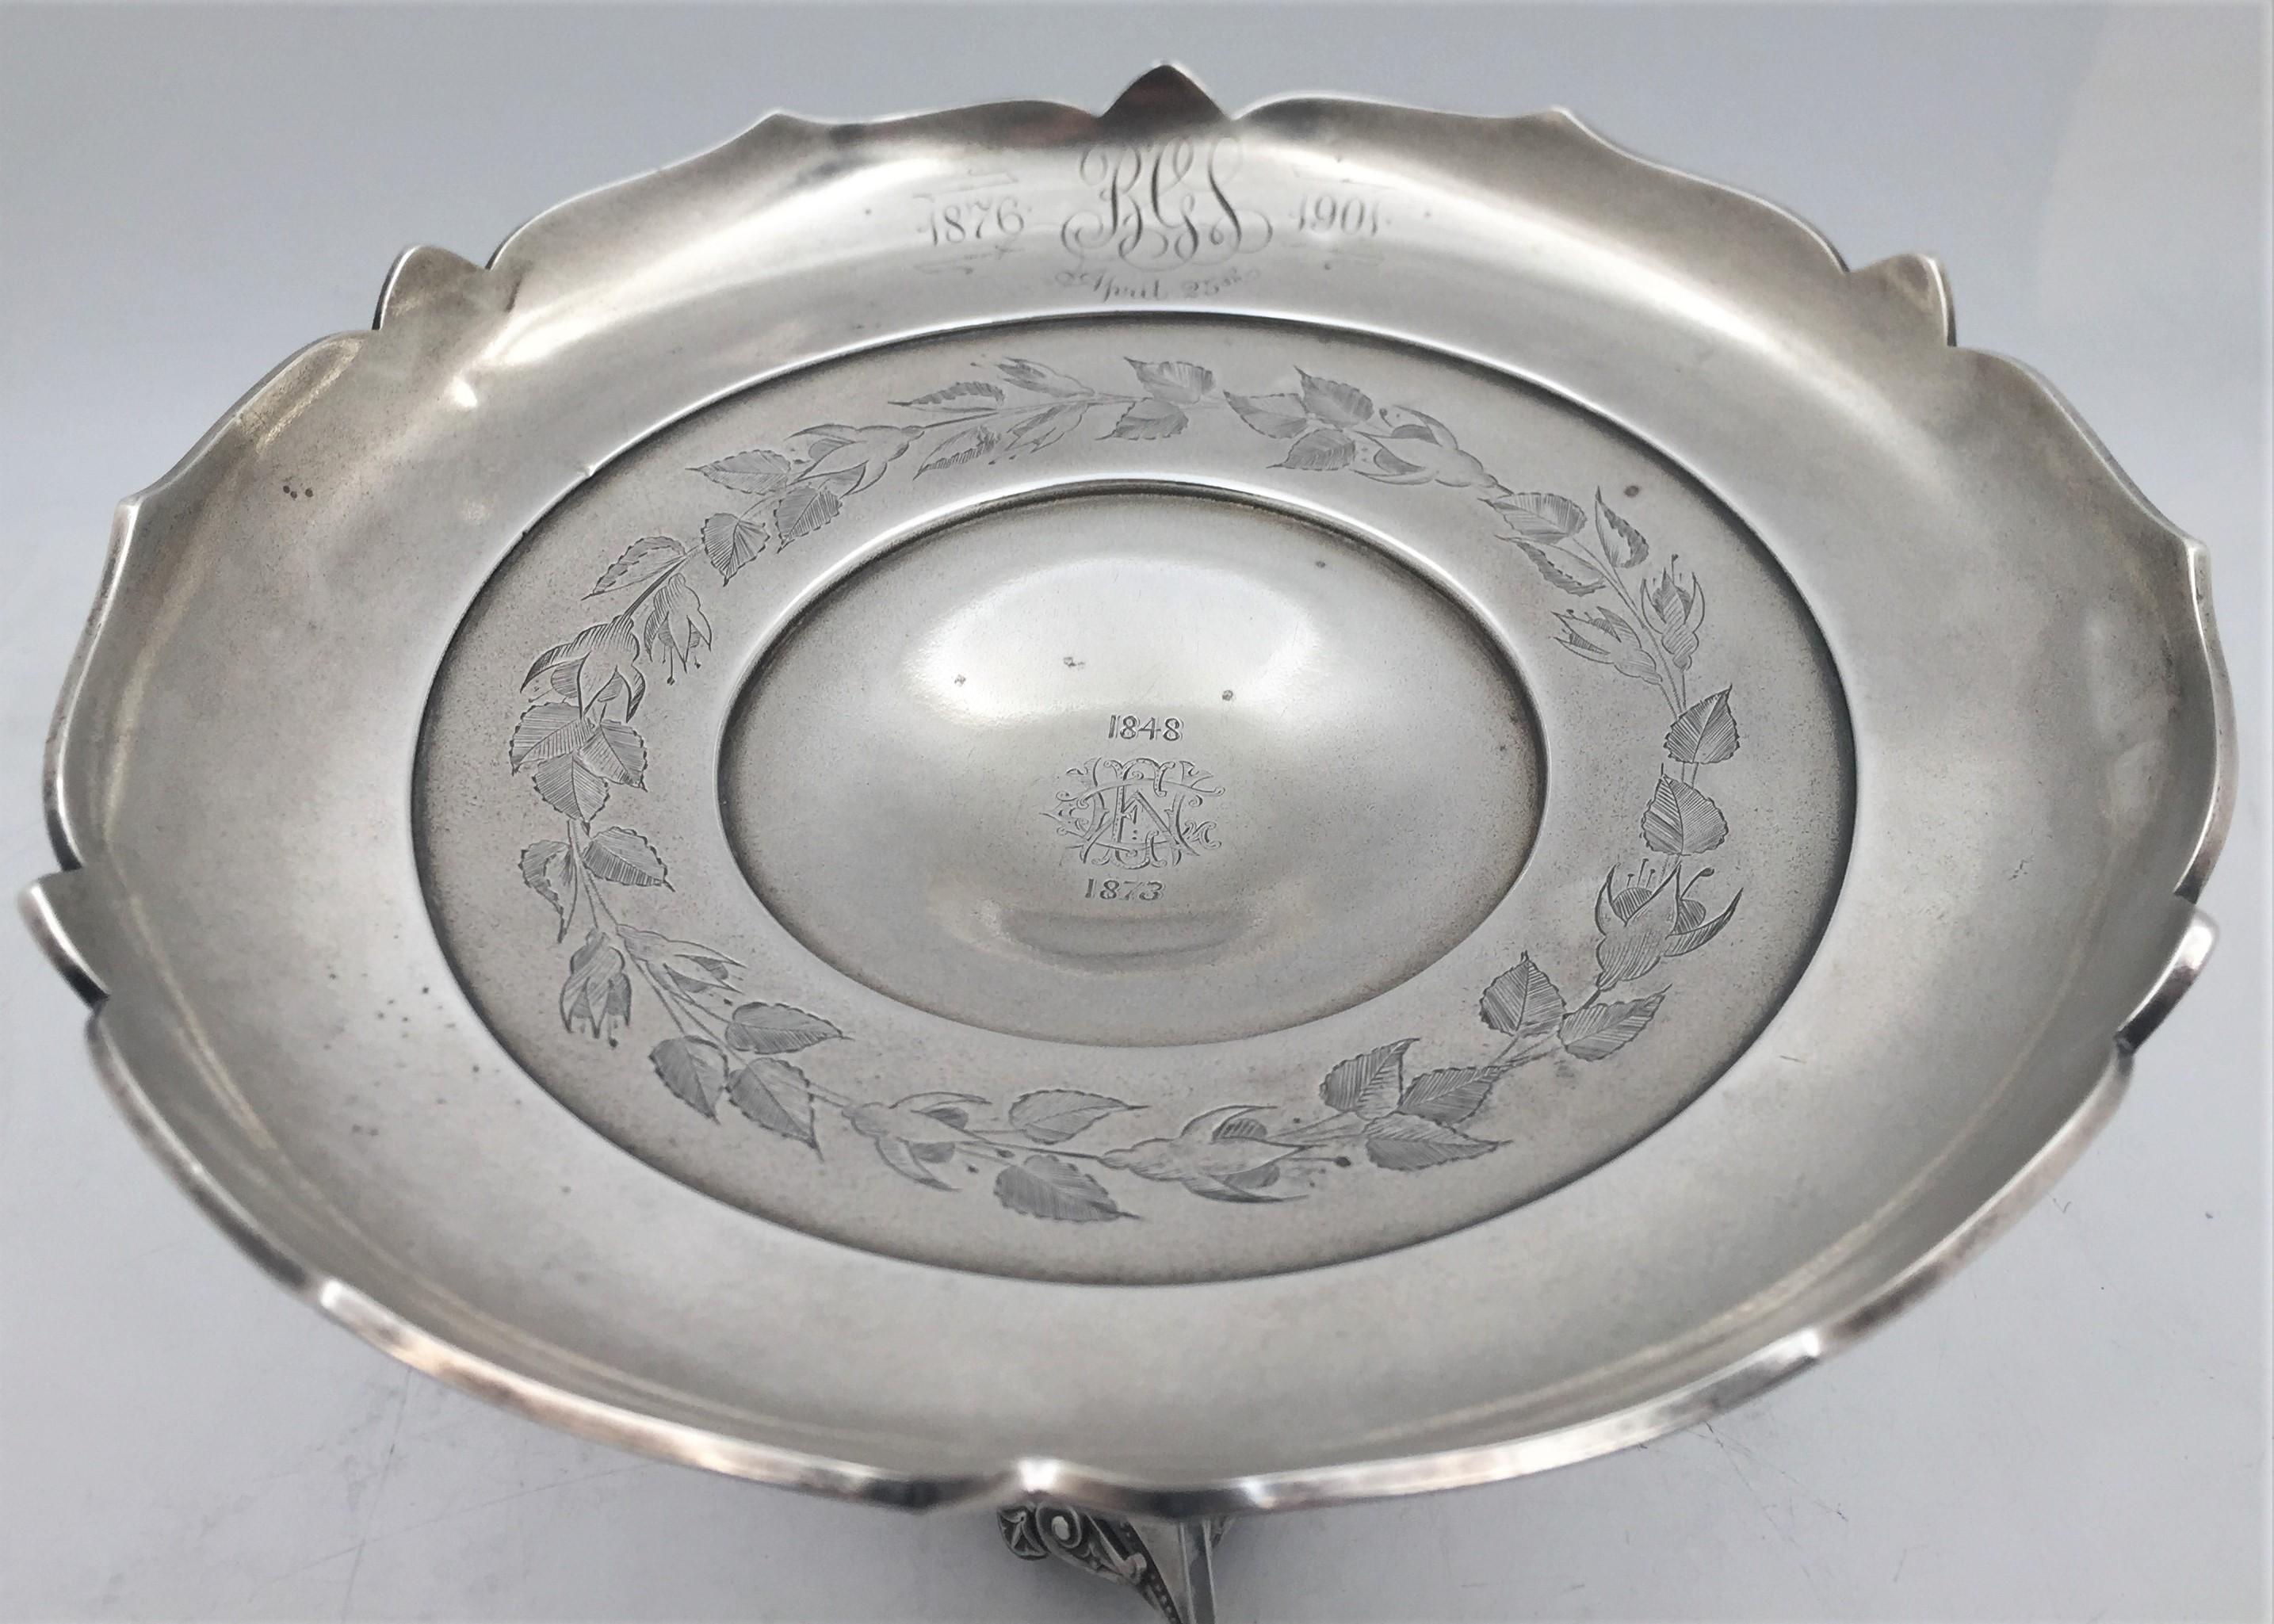 Whiting, sterling silver centerpiece stand from the late 19th century with exquisite engravings at the top, a reticulated rim as well as highly decorative, ornamental motifs adorning the stem and 3 feet. It measures 10'' in diameter by 8 7/8'' in